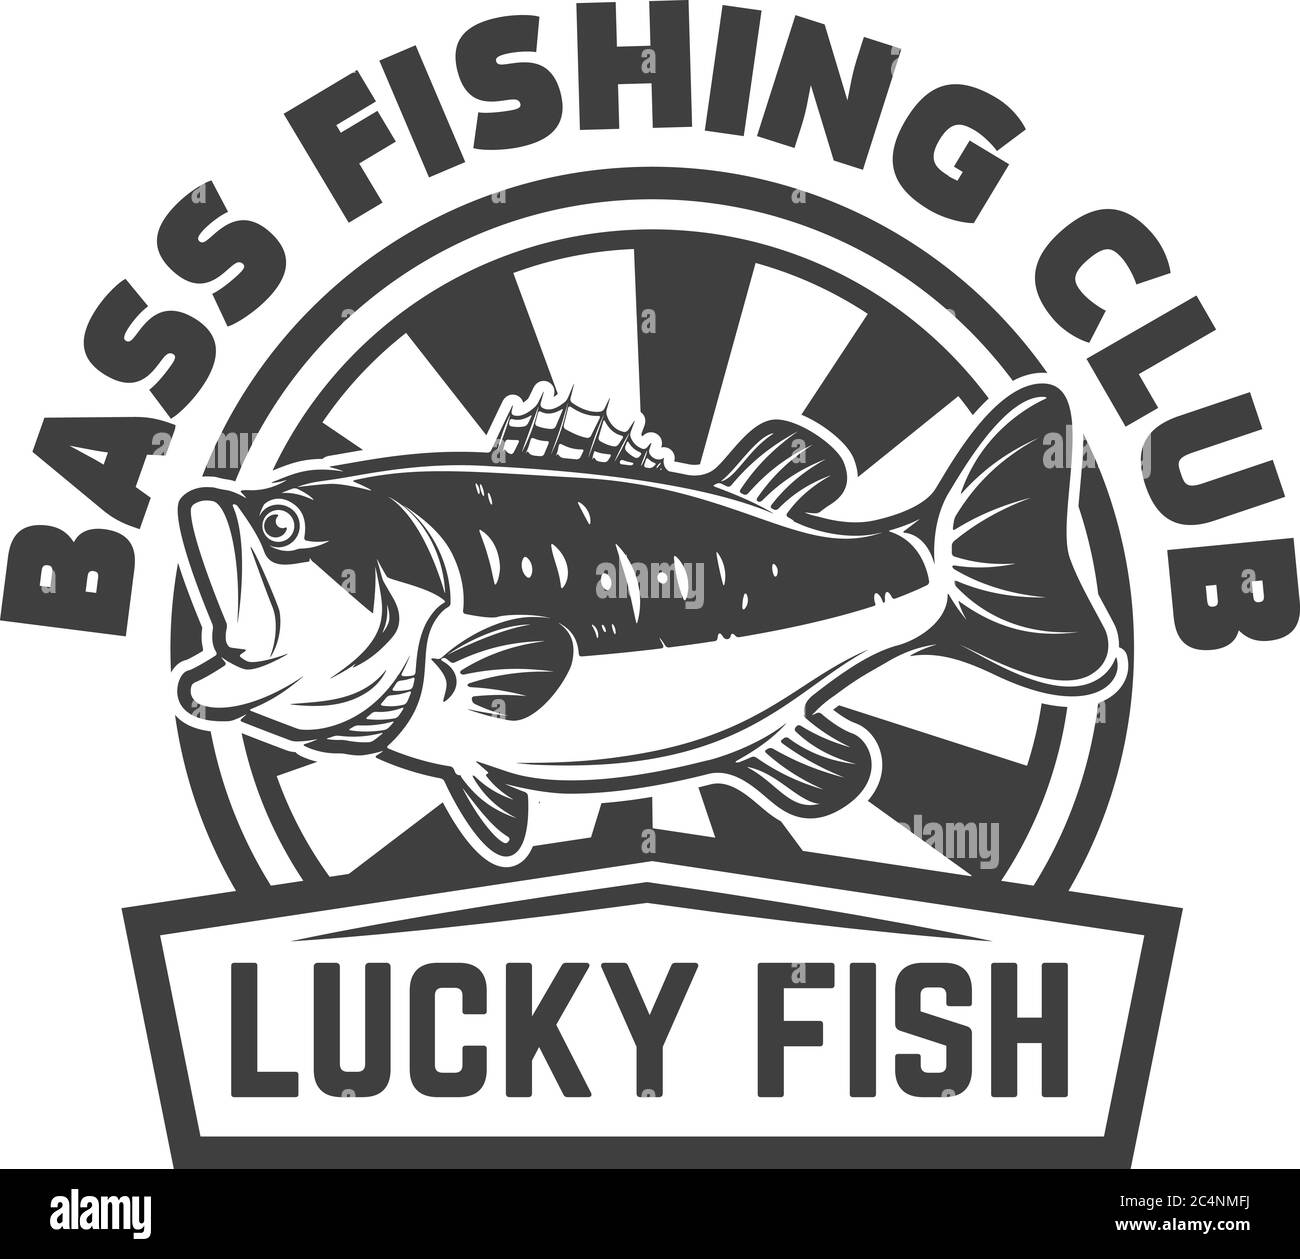 Bass fishing club. Emblem template with perch. Design element for logo ...